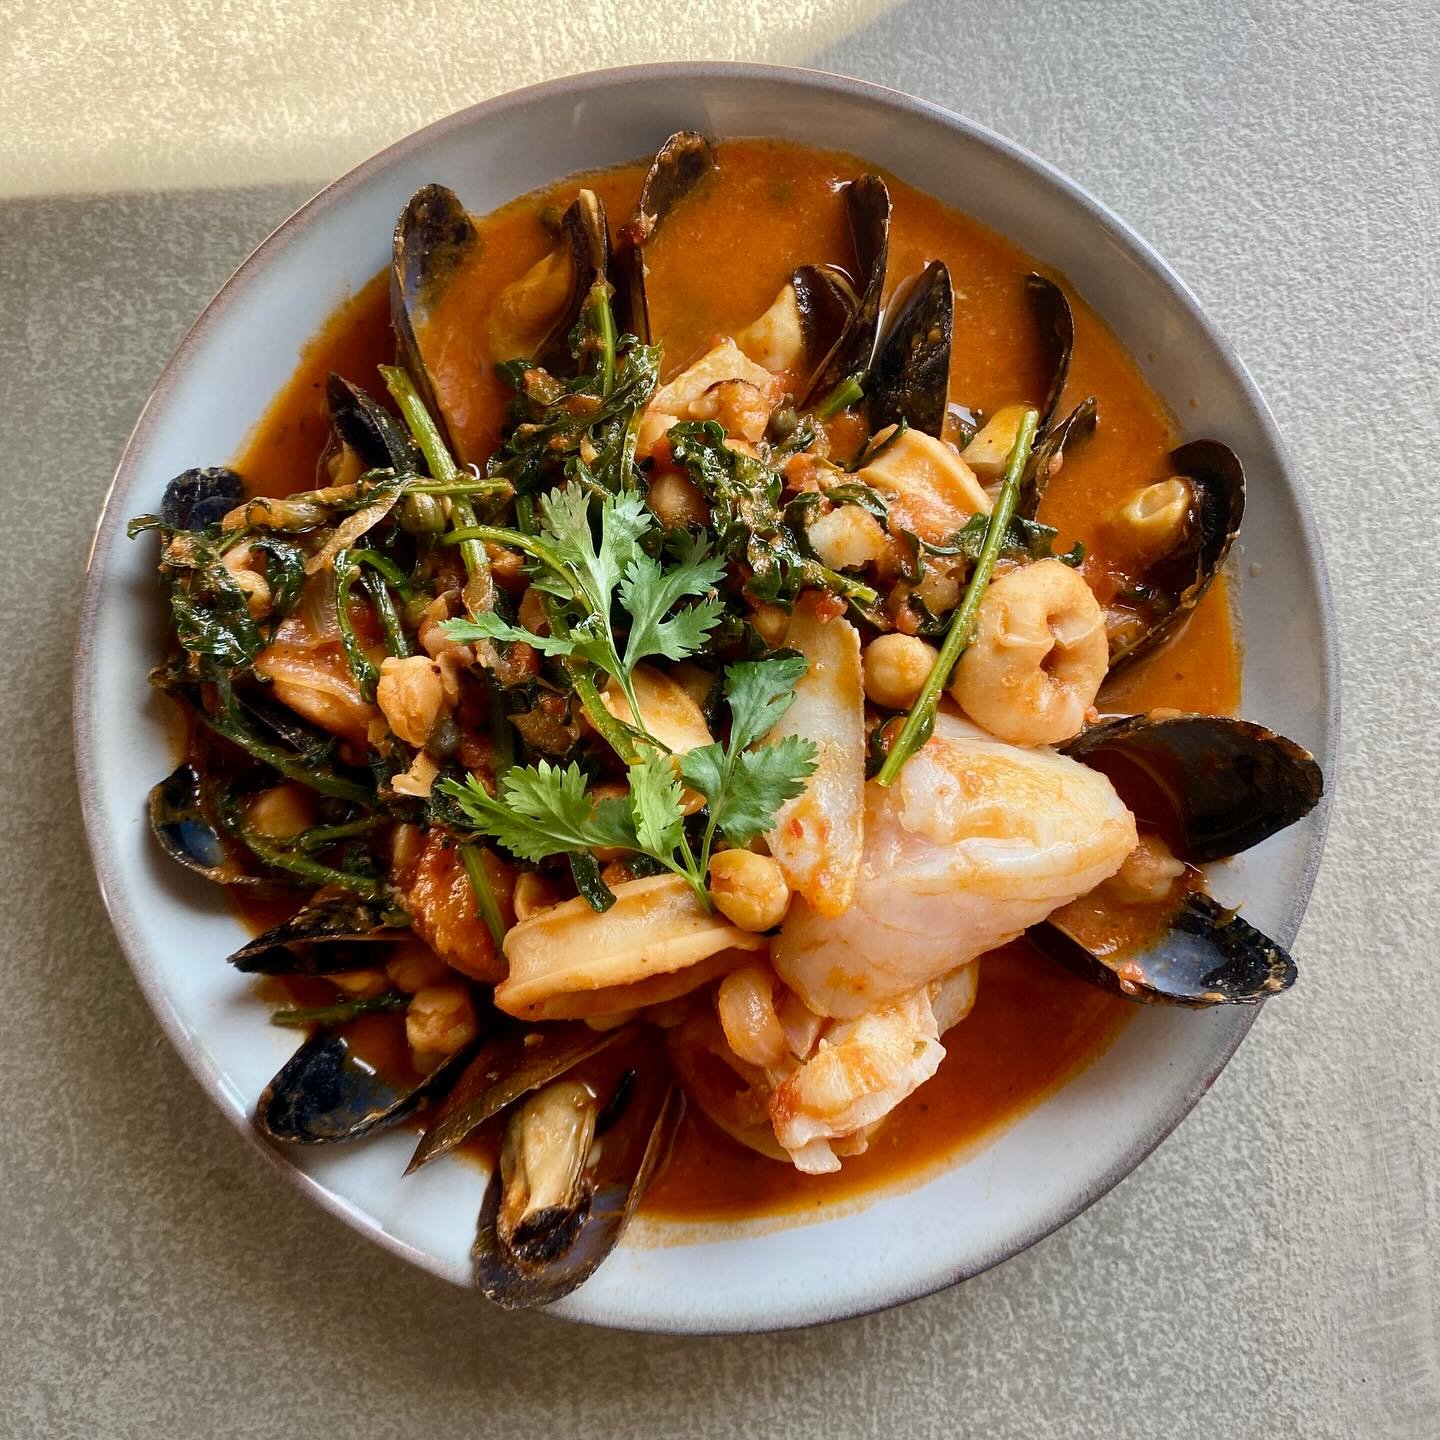 It&rsquo;s Fridayyyyyy🕺🏻and we have killer specials to kick off the weekend!

🦐 Frutti di Mare - Italian seafood stew of mussels, cod, and shrimp in a spicy tomato sauce over bucatini pasta

🥓 Braciole - thin pounded eye round steak wrapped in ba